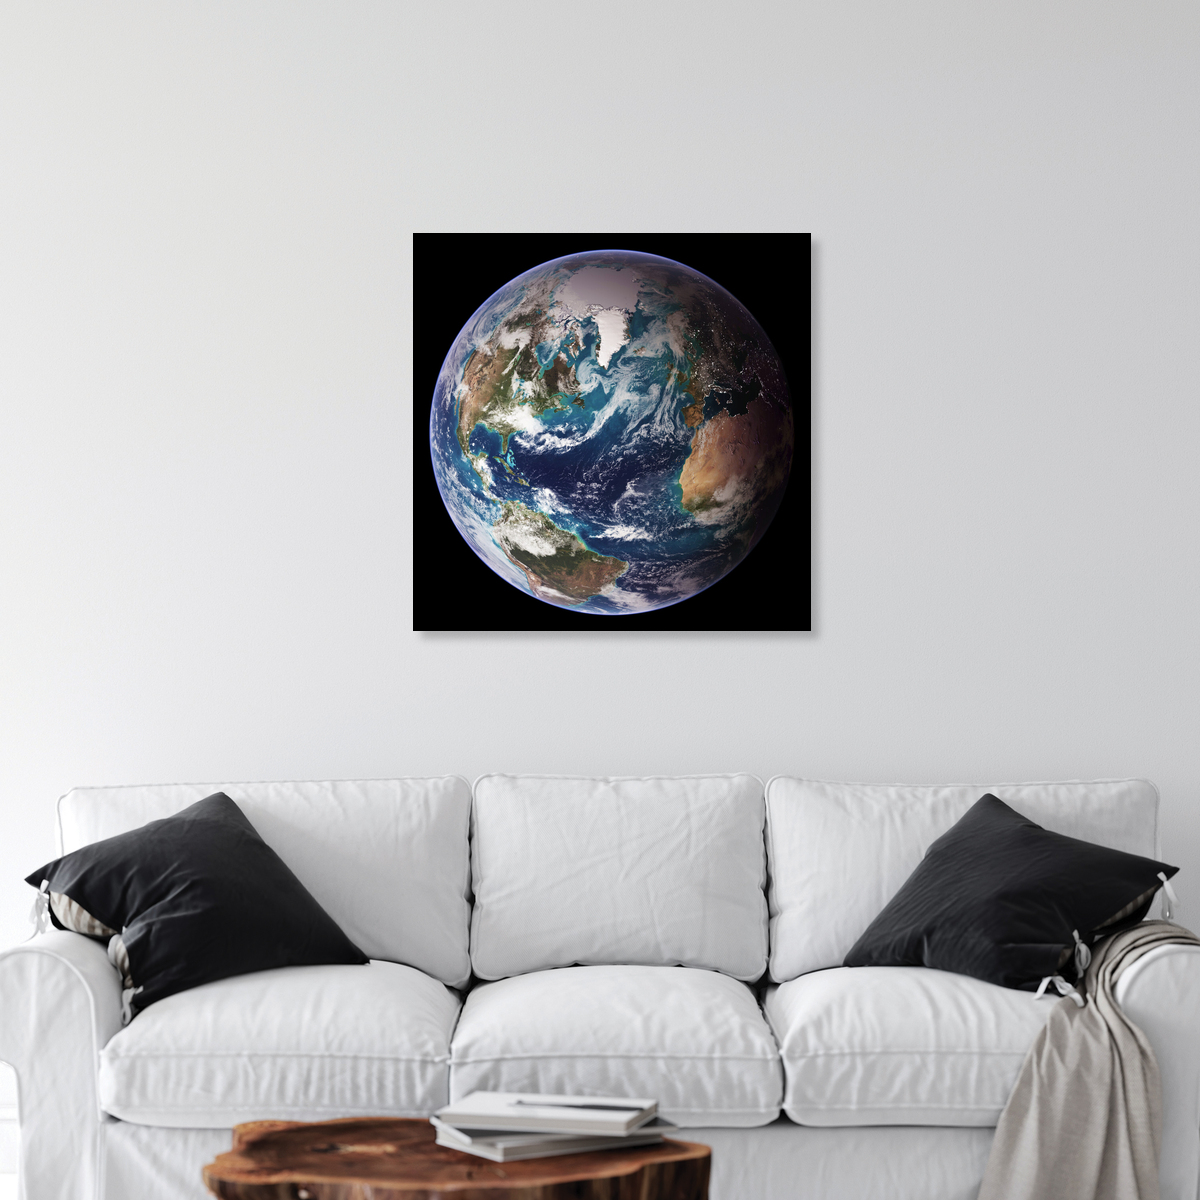 NEW LARGE THE EARTH HIGH RESOLUTION GENUINE SATELLITE PIC PRINT PREMIUM POSTER 